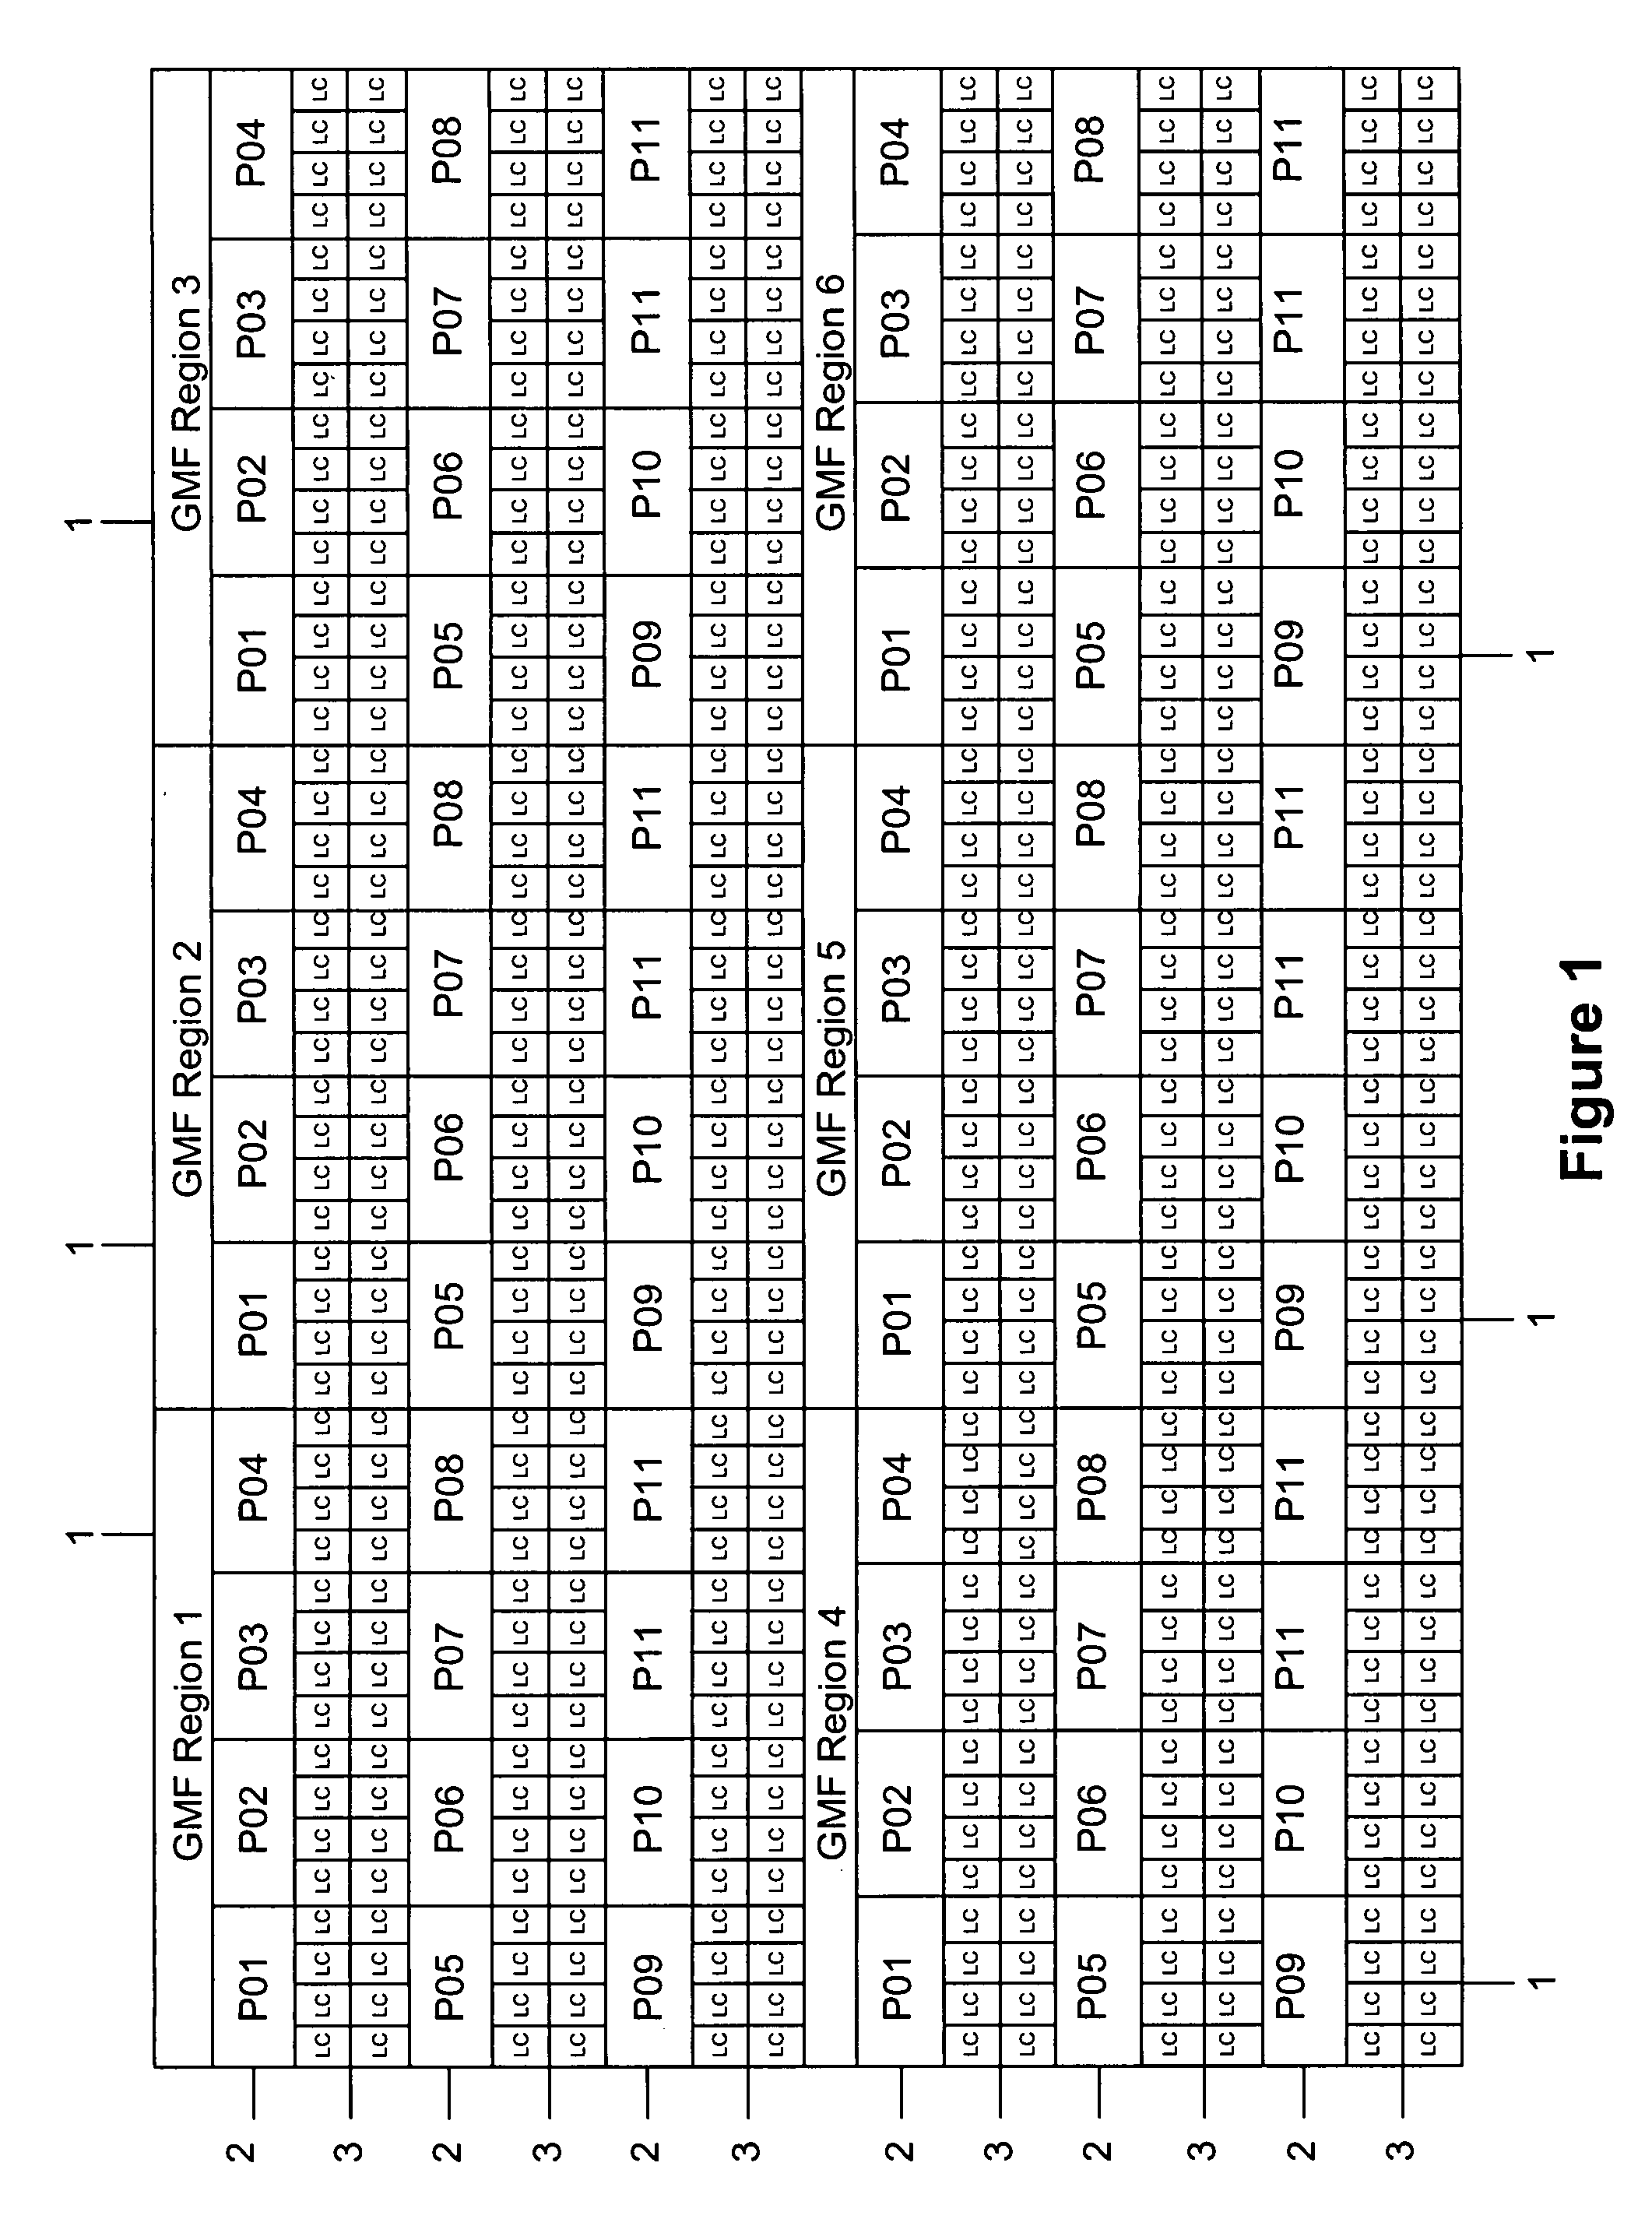 Systems and methods for providing a network using postal routed node topology